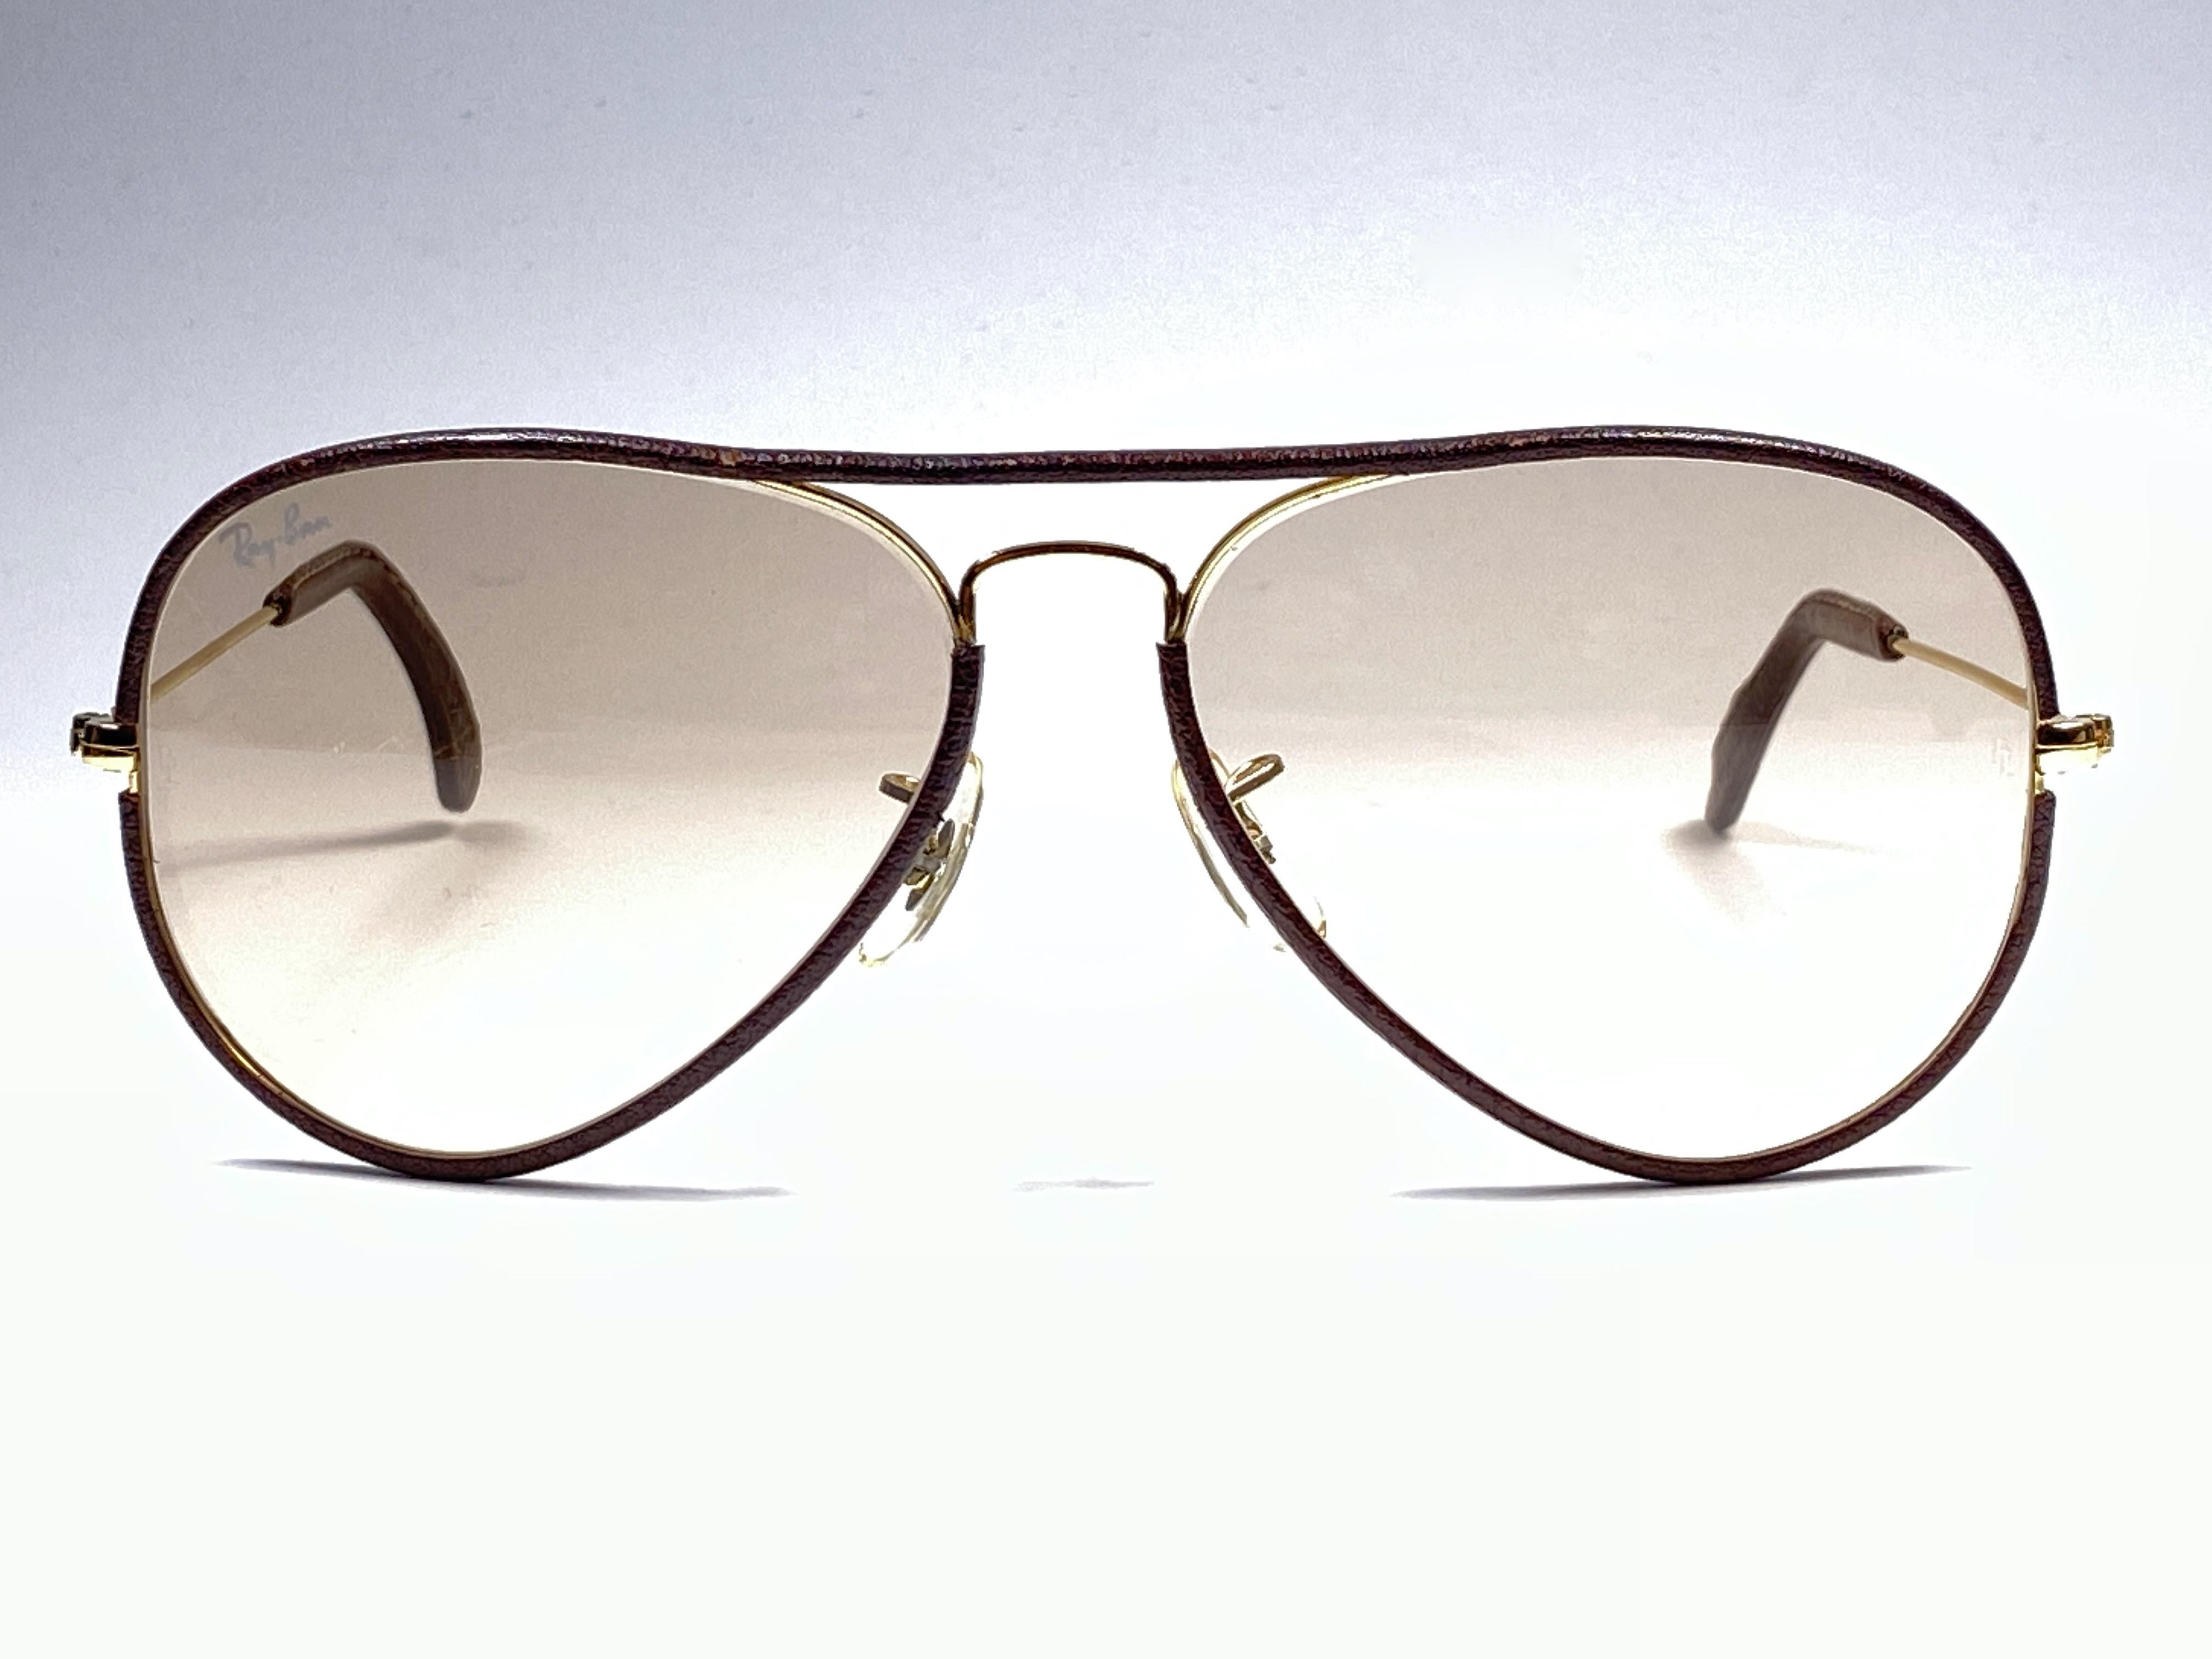 Vintage Ray Ban Leathers 62mm in brown leather with gold metal combination frame sporting brown changeable lenses.

No leathers case included, we offer a generic Ray Ban case.
Rare and hard to find in this condition.

